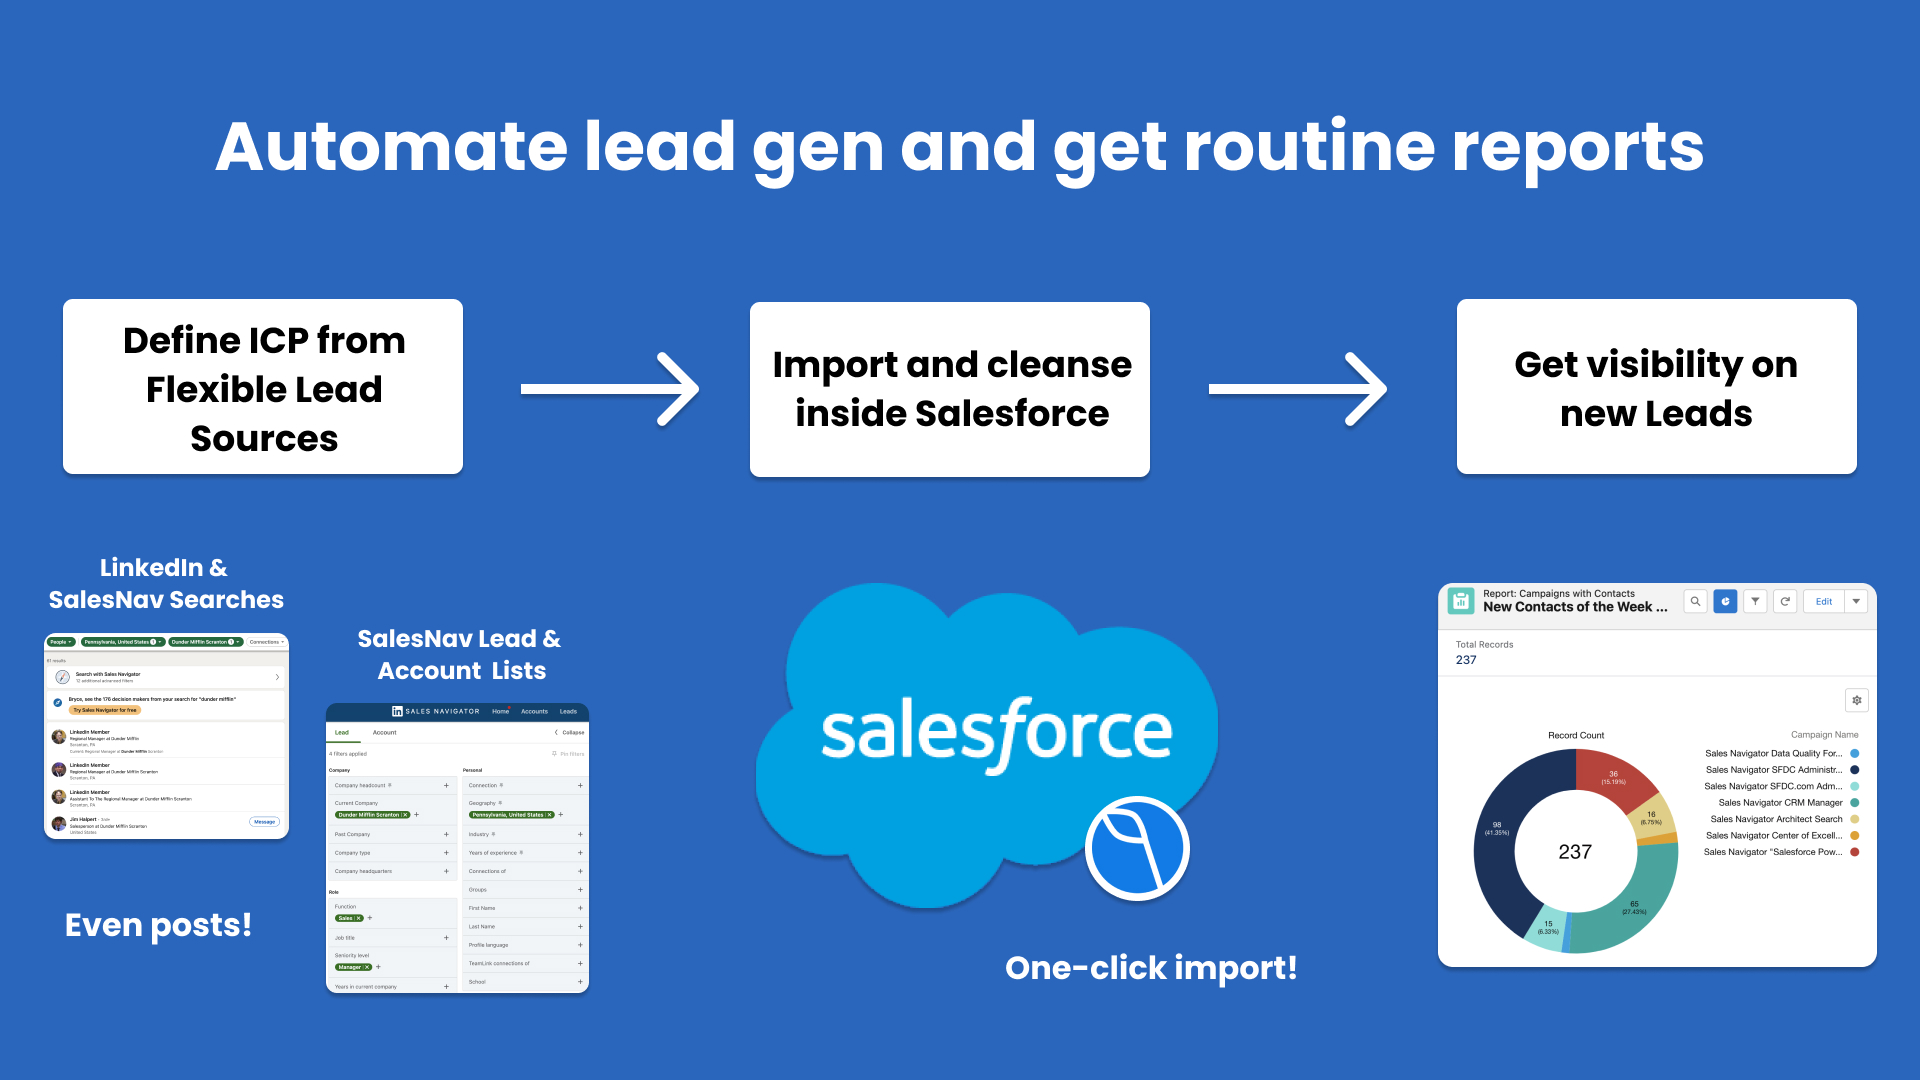 LinkedIn Lead Generation gives users flexibility where they want to search or filter for their specific ICPs within the LinkedIn product portfolio (example basic LinkedIn searches, SalesNav lead lists, or even posts) and import that data into Salesforce t